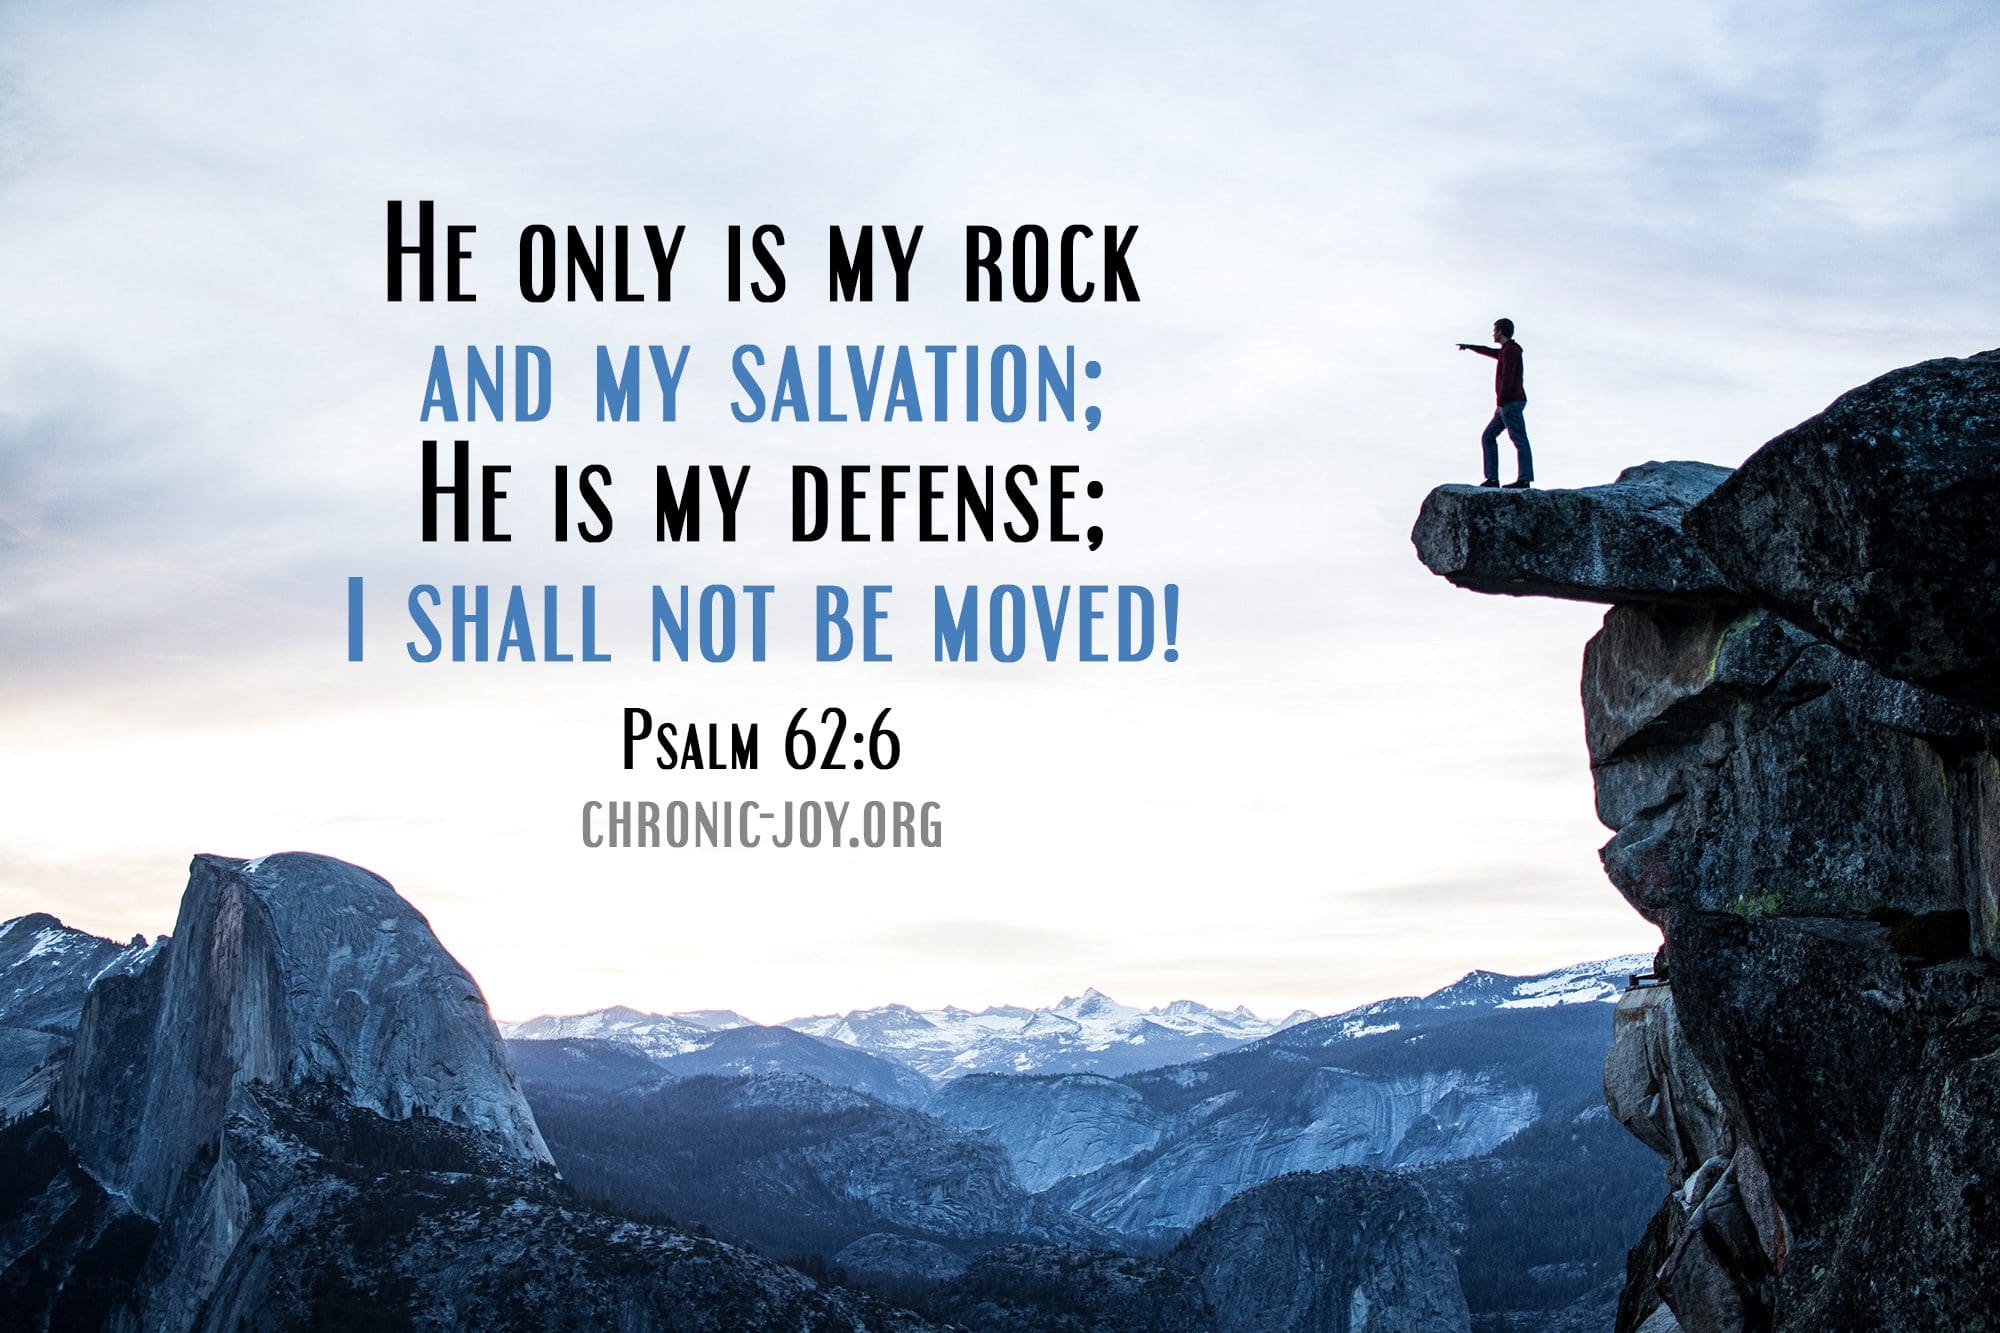 "He only is my rock and my salvation; He is my defense; I shall not be moved!" Psalm 62:6